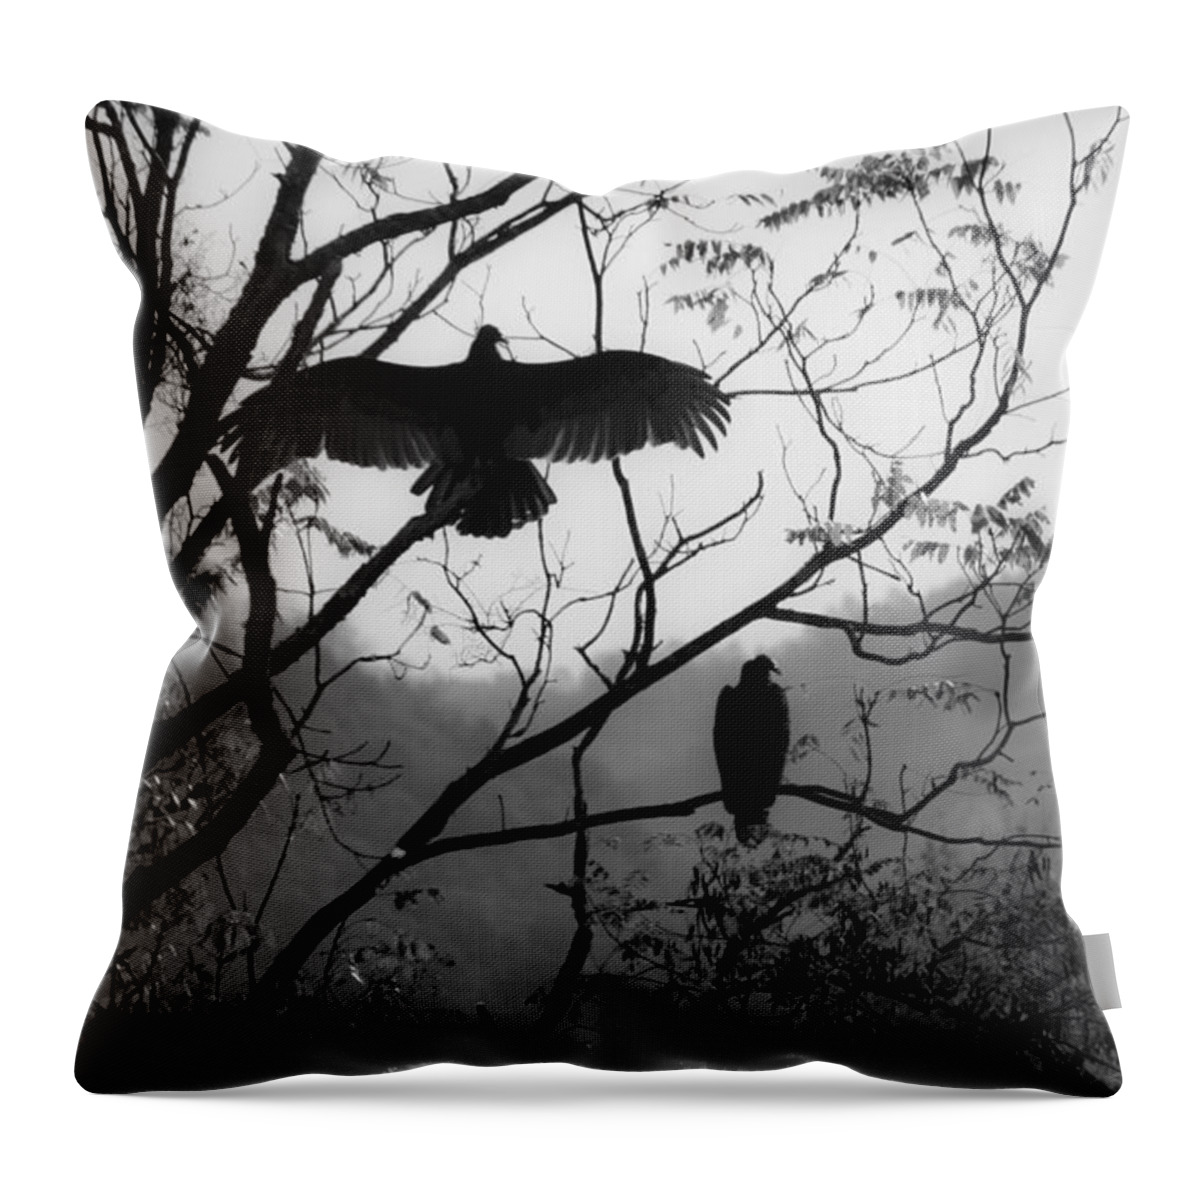 Black Throw Pillow featuring the photograph Black Buzzards Sunning by Teresa Mucha